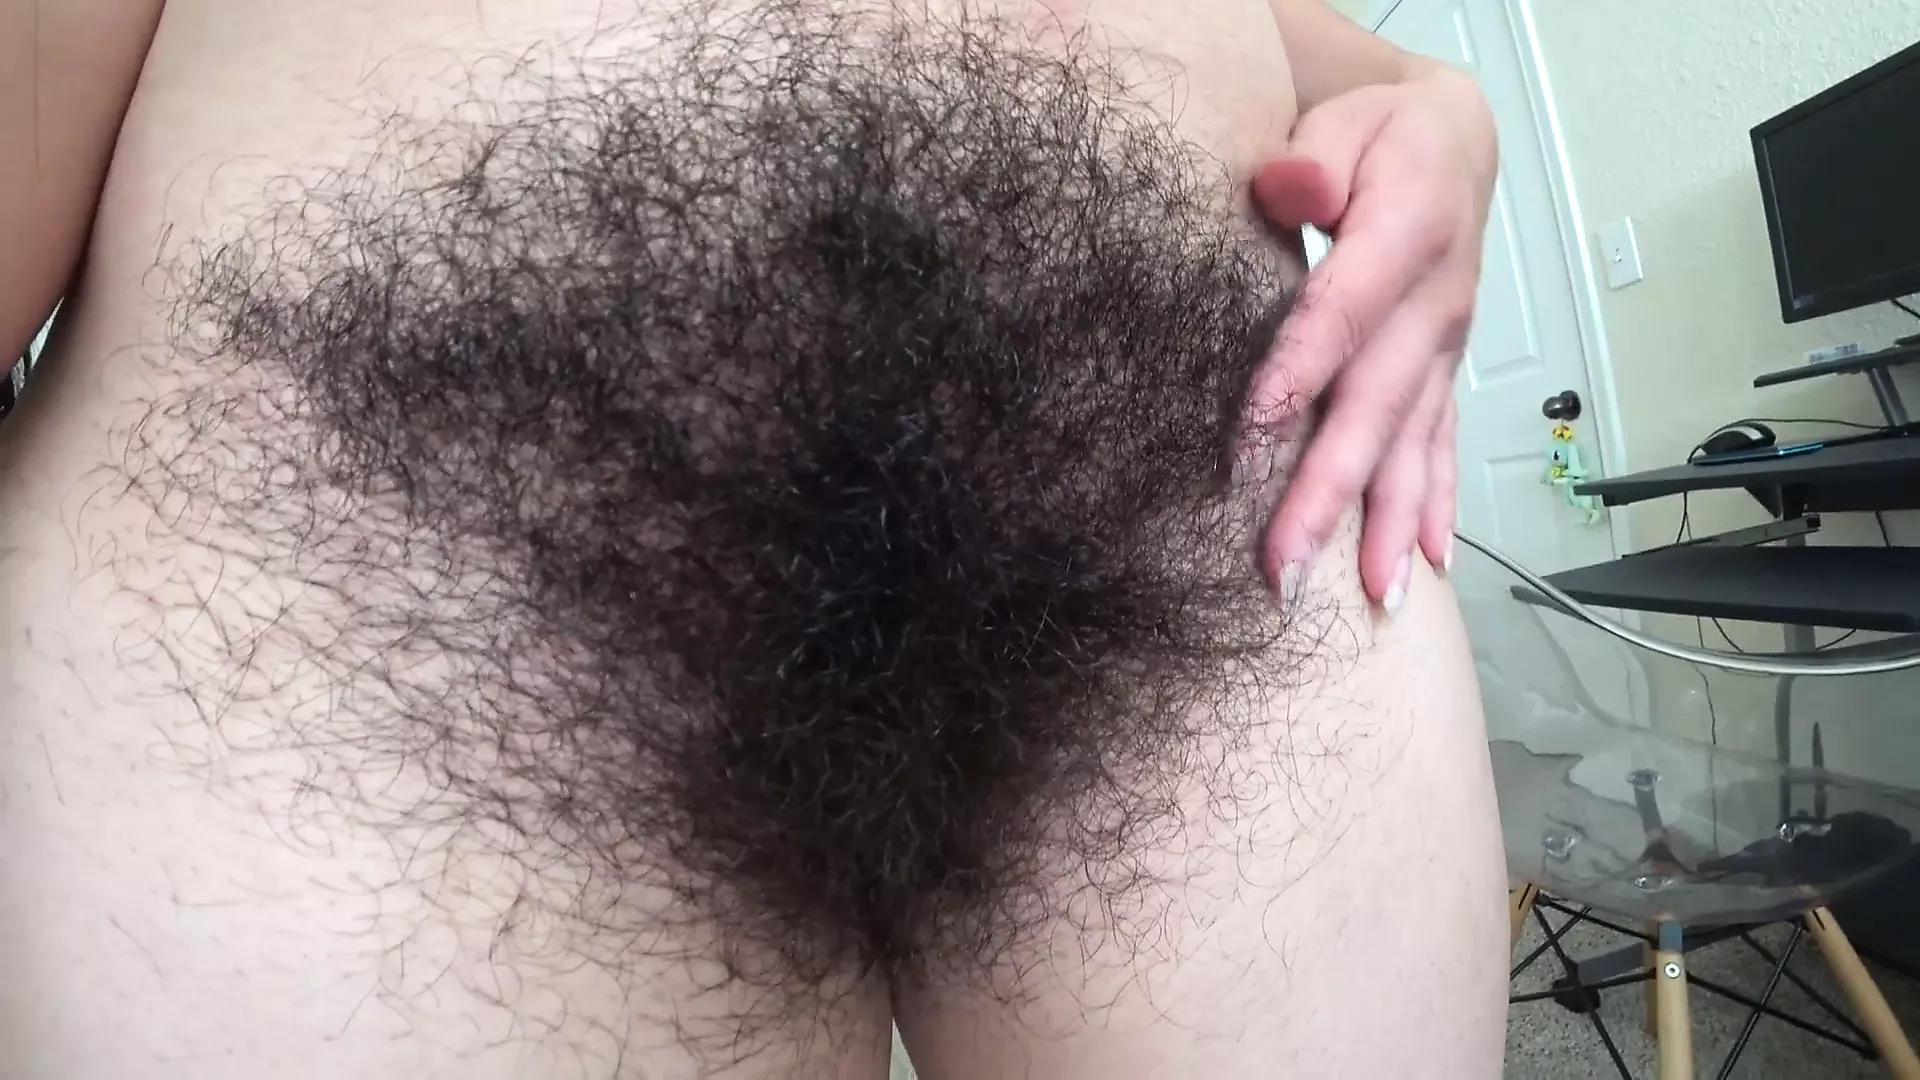 Extremely hairy girl